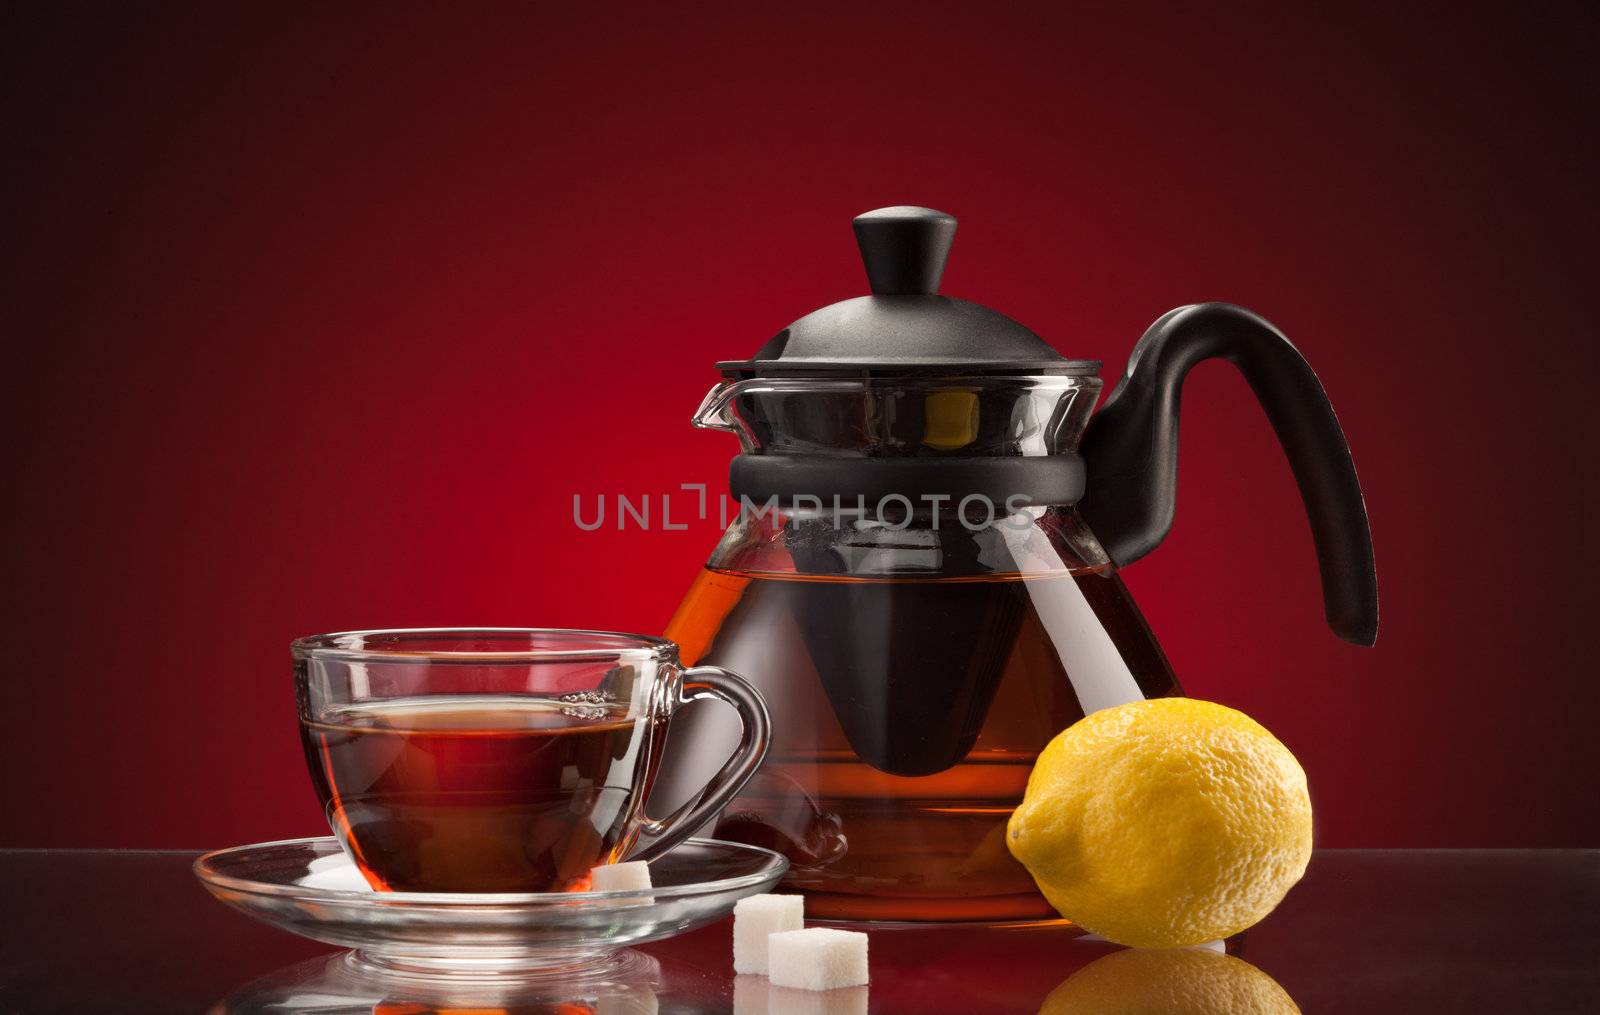 glassy teacup and teapot with tea and lemon over red